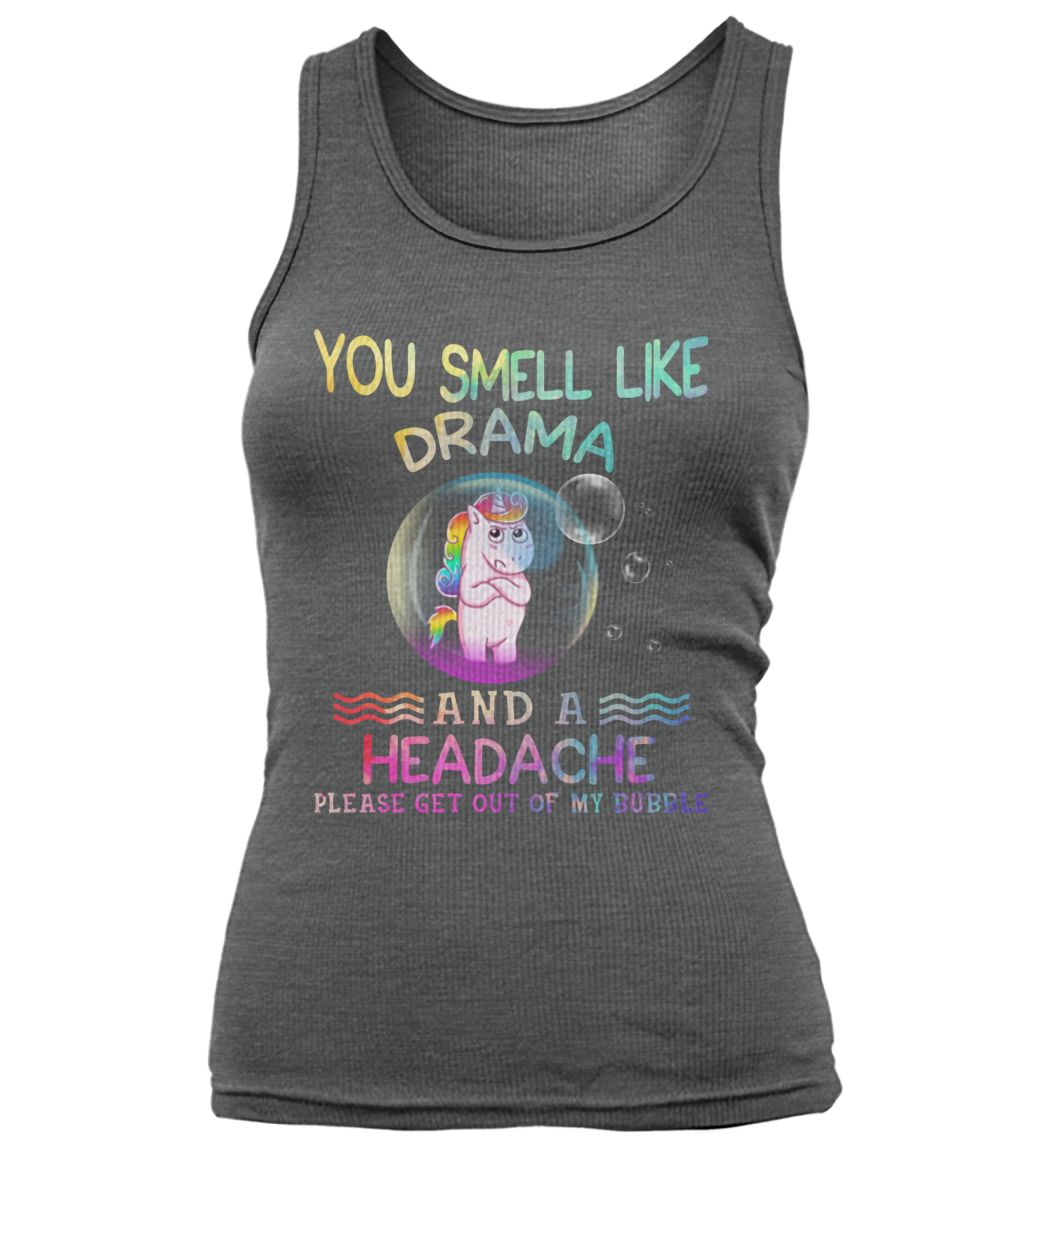 Unicorn you smell like drama and a headache please get out of my bubble women's tank top